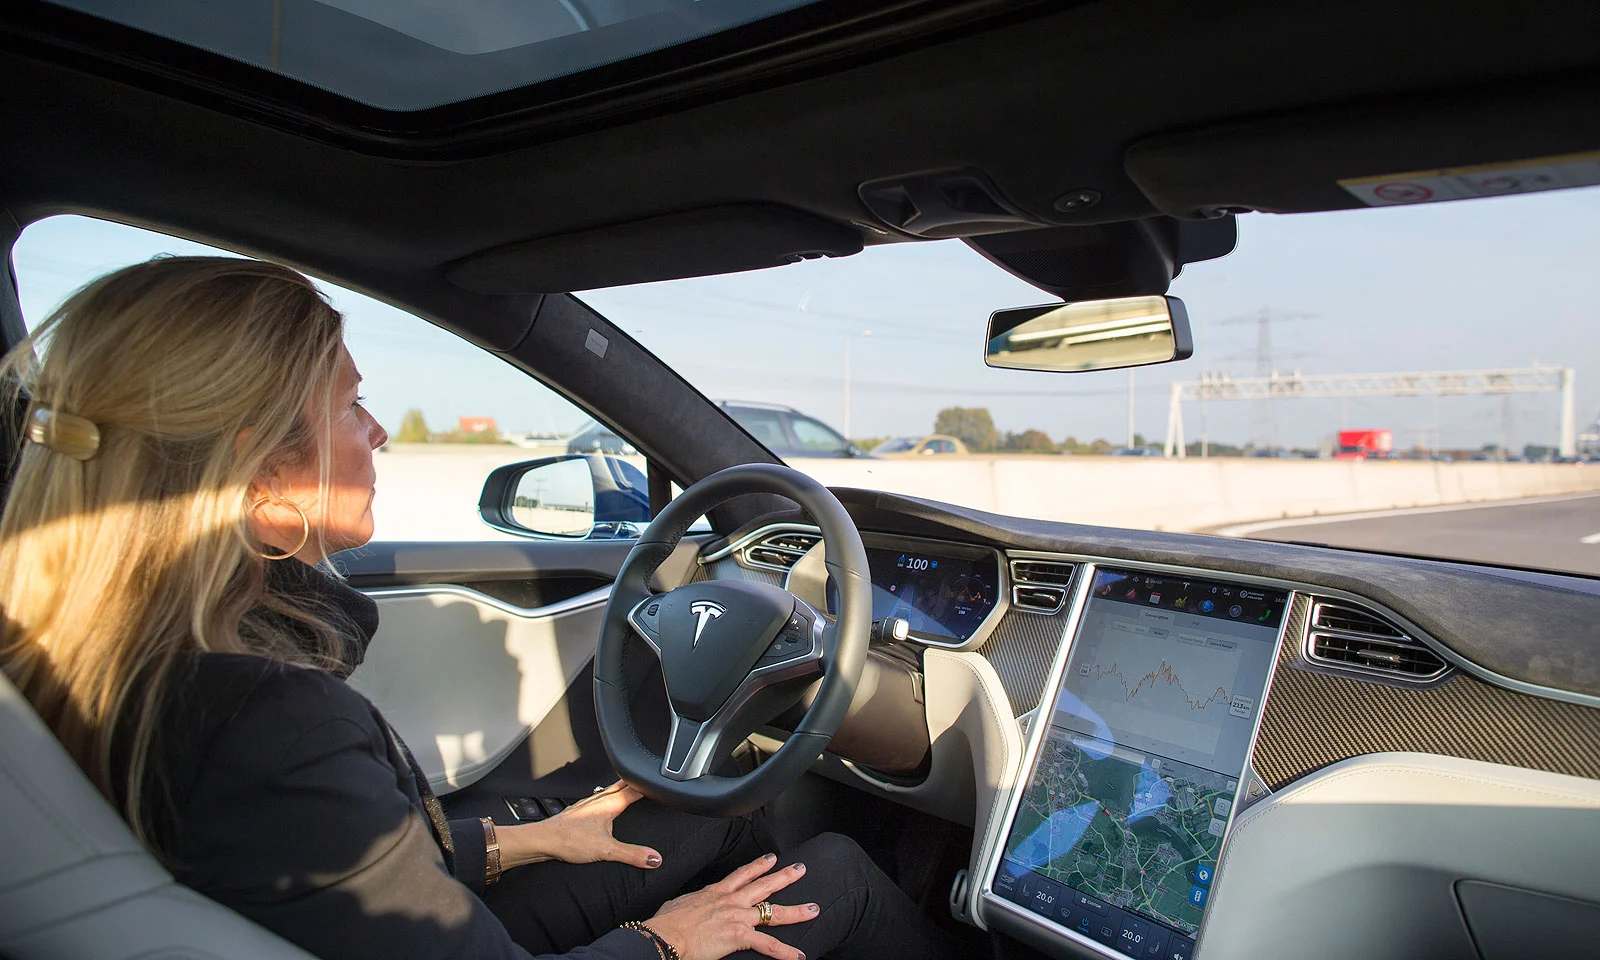 Tesla cars will be able to block attempts to circumvent requirements to keep hands on steering wheel